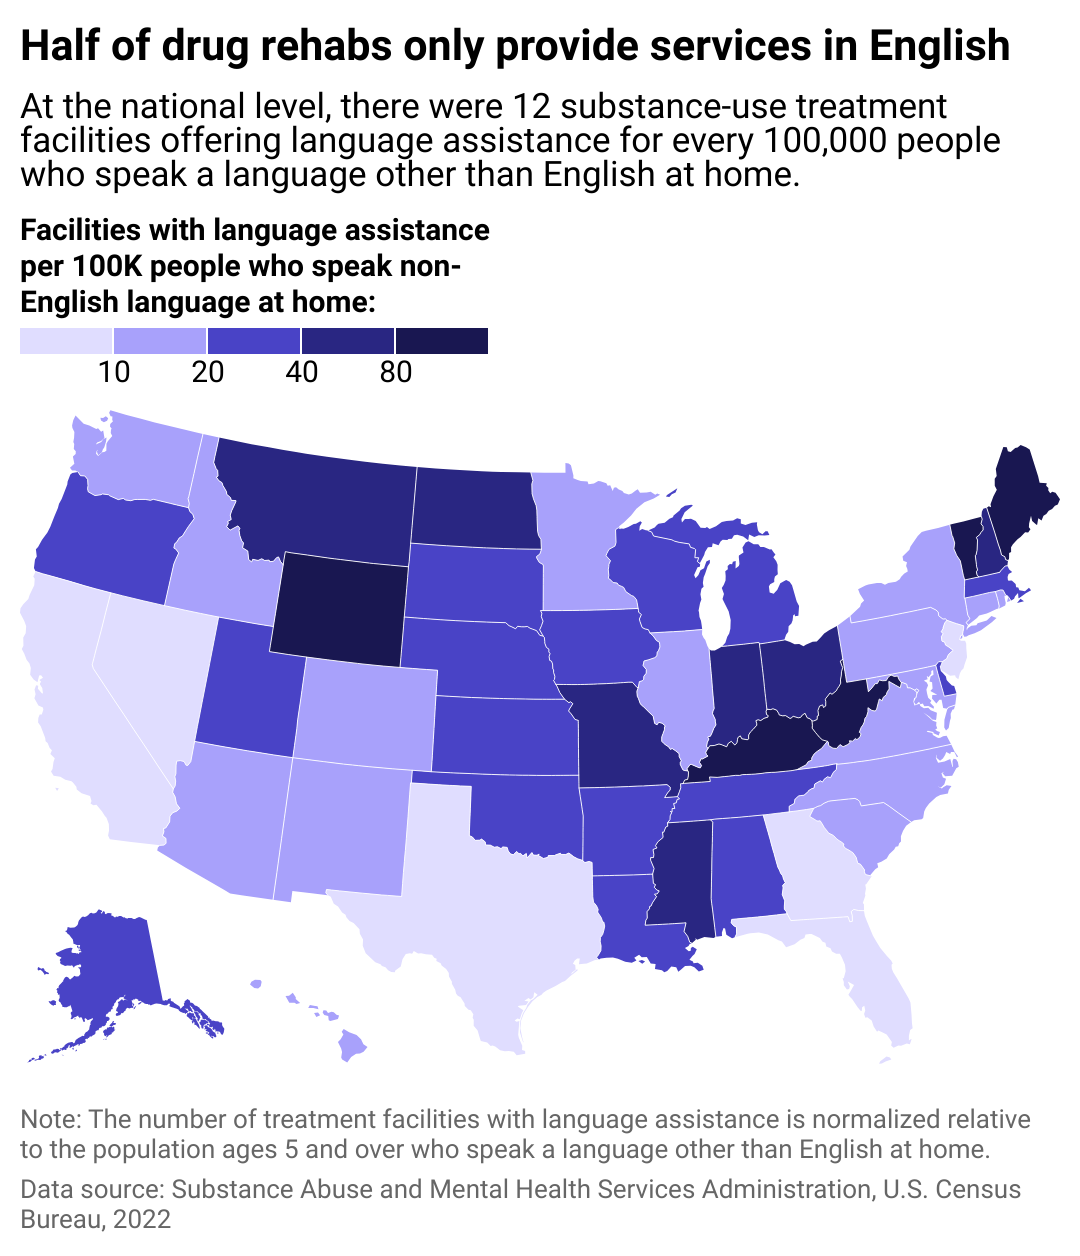 A U.S. map shows how many substance-use treatment facilities with language assistance services there are per 100,000 people who speak non-English language at home in each state. Half of drug rehabs only provide services in English. At the national level, there were 12 substance-use treatment facilities offering language assistance for every 100,000 people who speak a language other than English at home. 